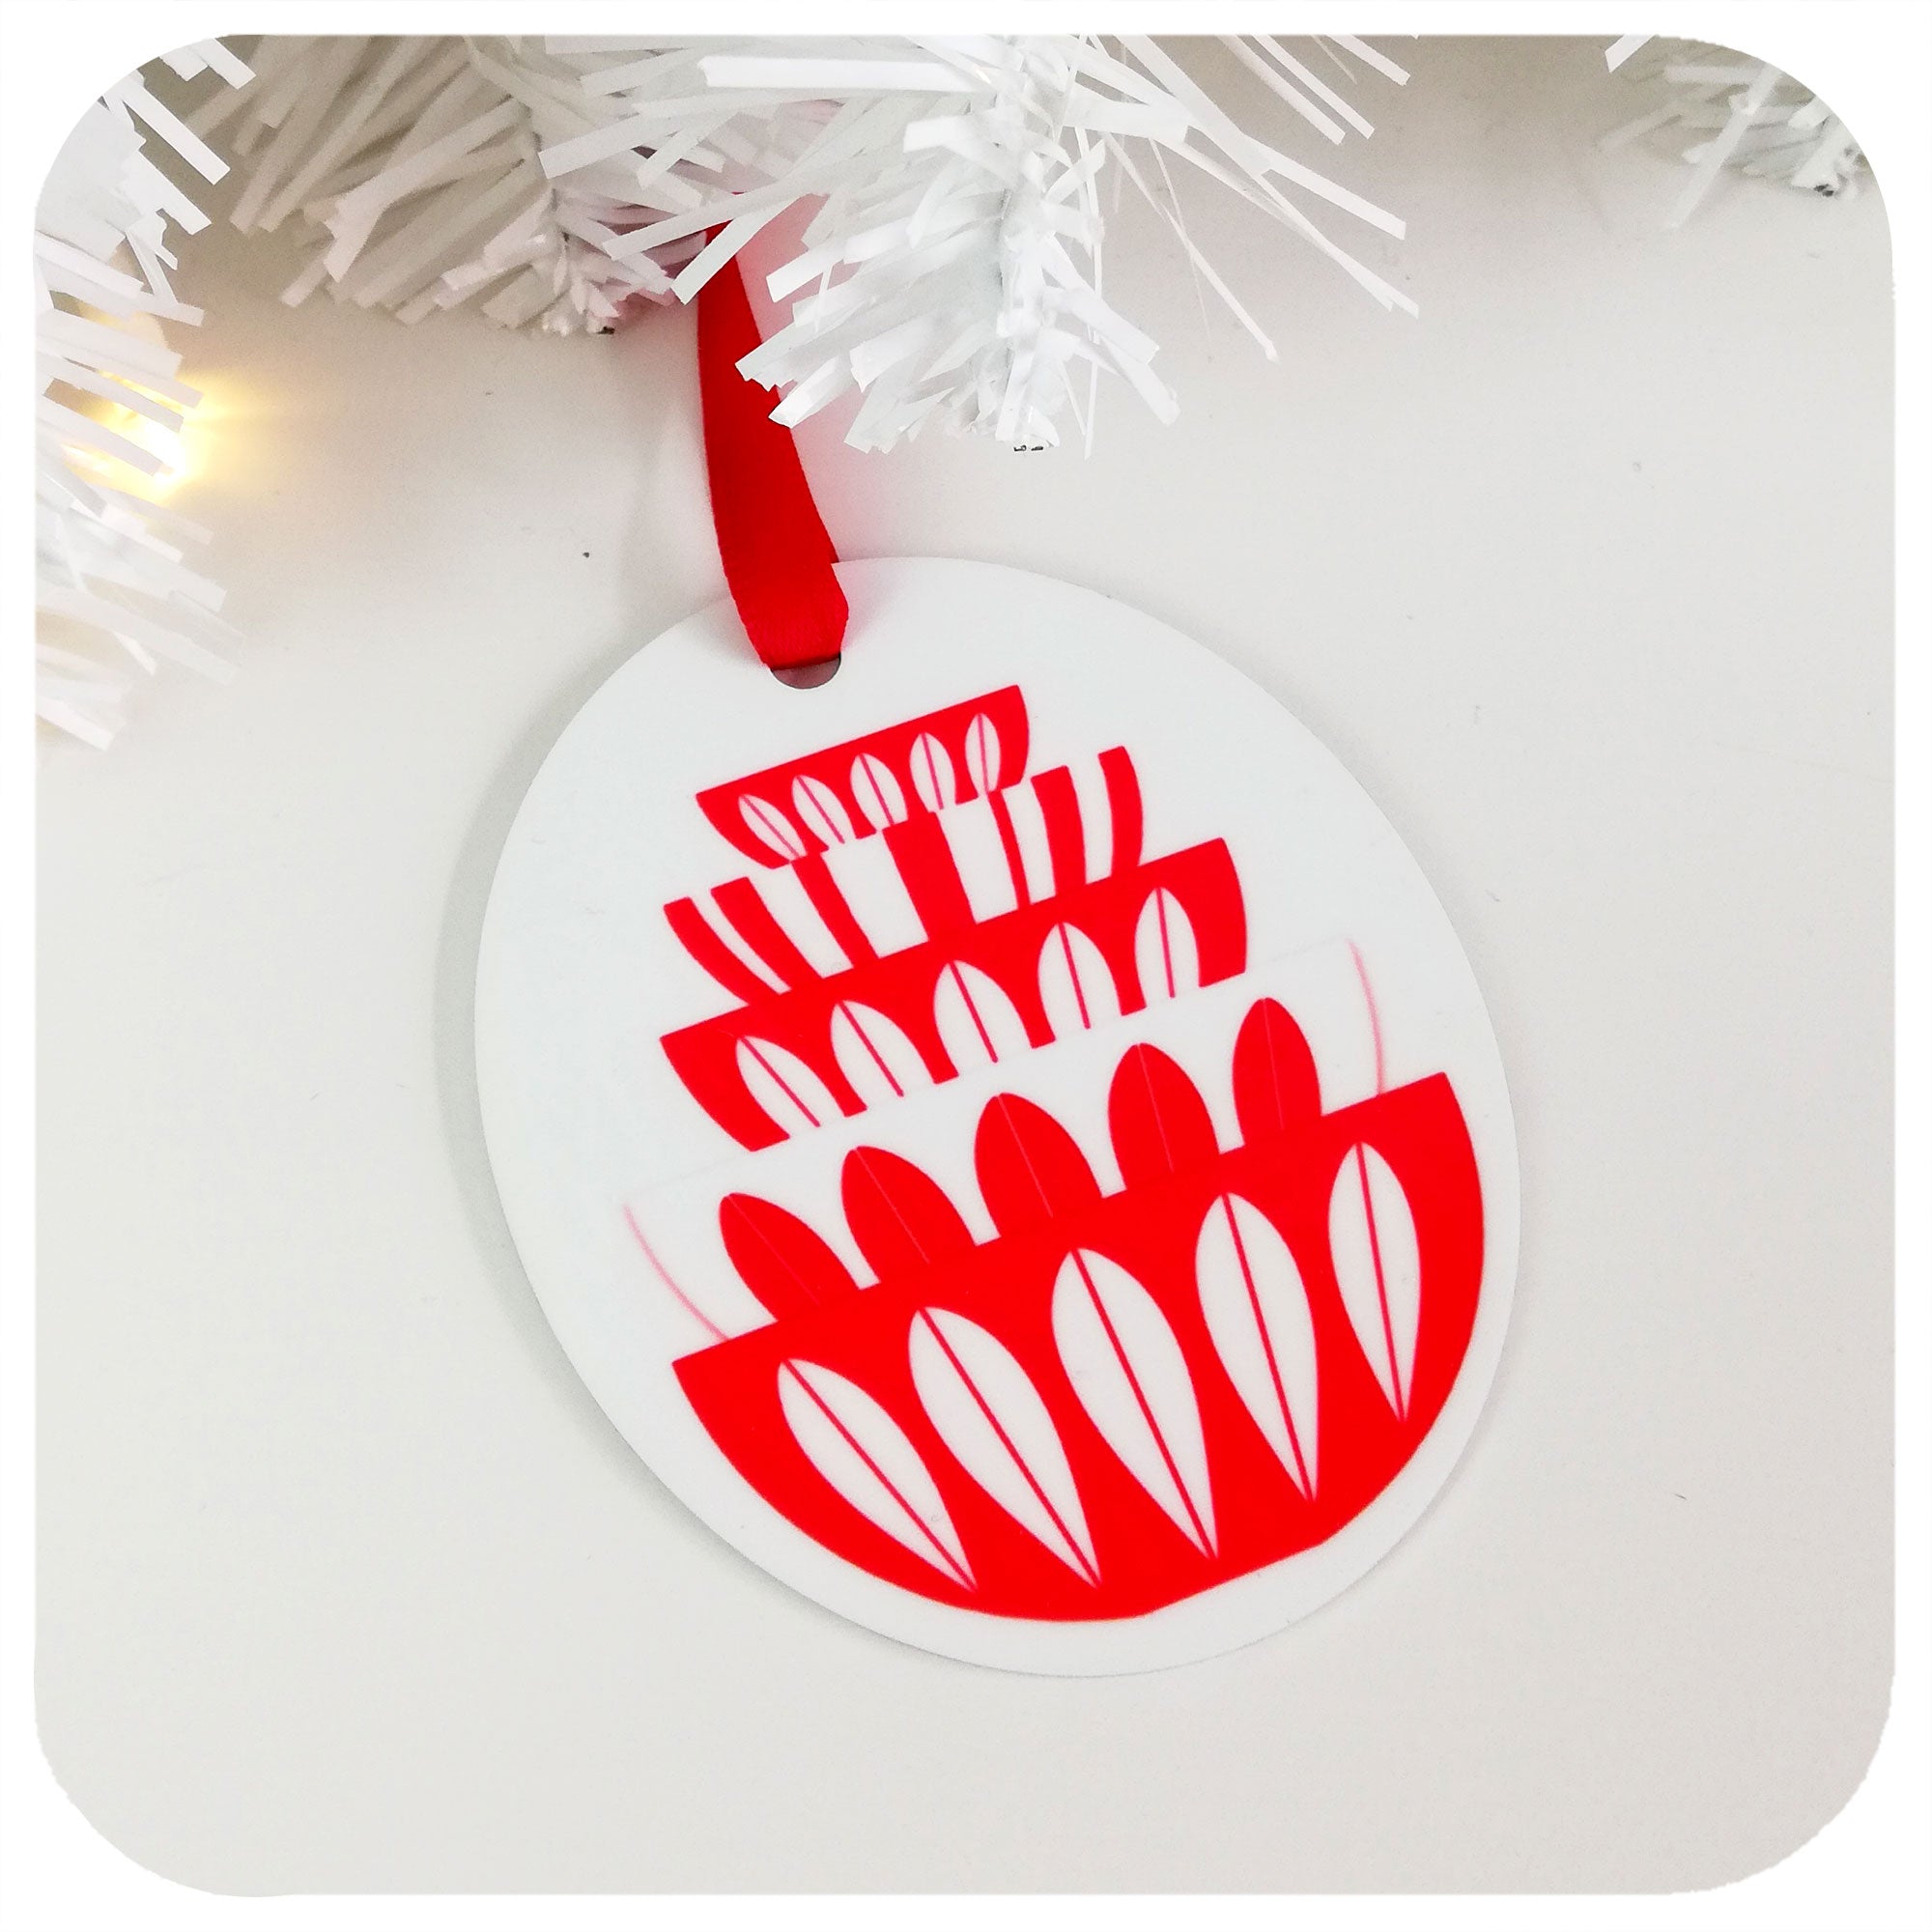 Christmas Tree Decoration with image of Cathrineholm bowls in red & white, laying flat on table | The Inkabilly Emporium